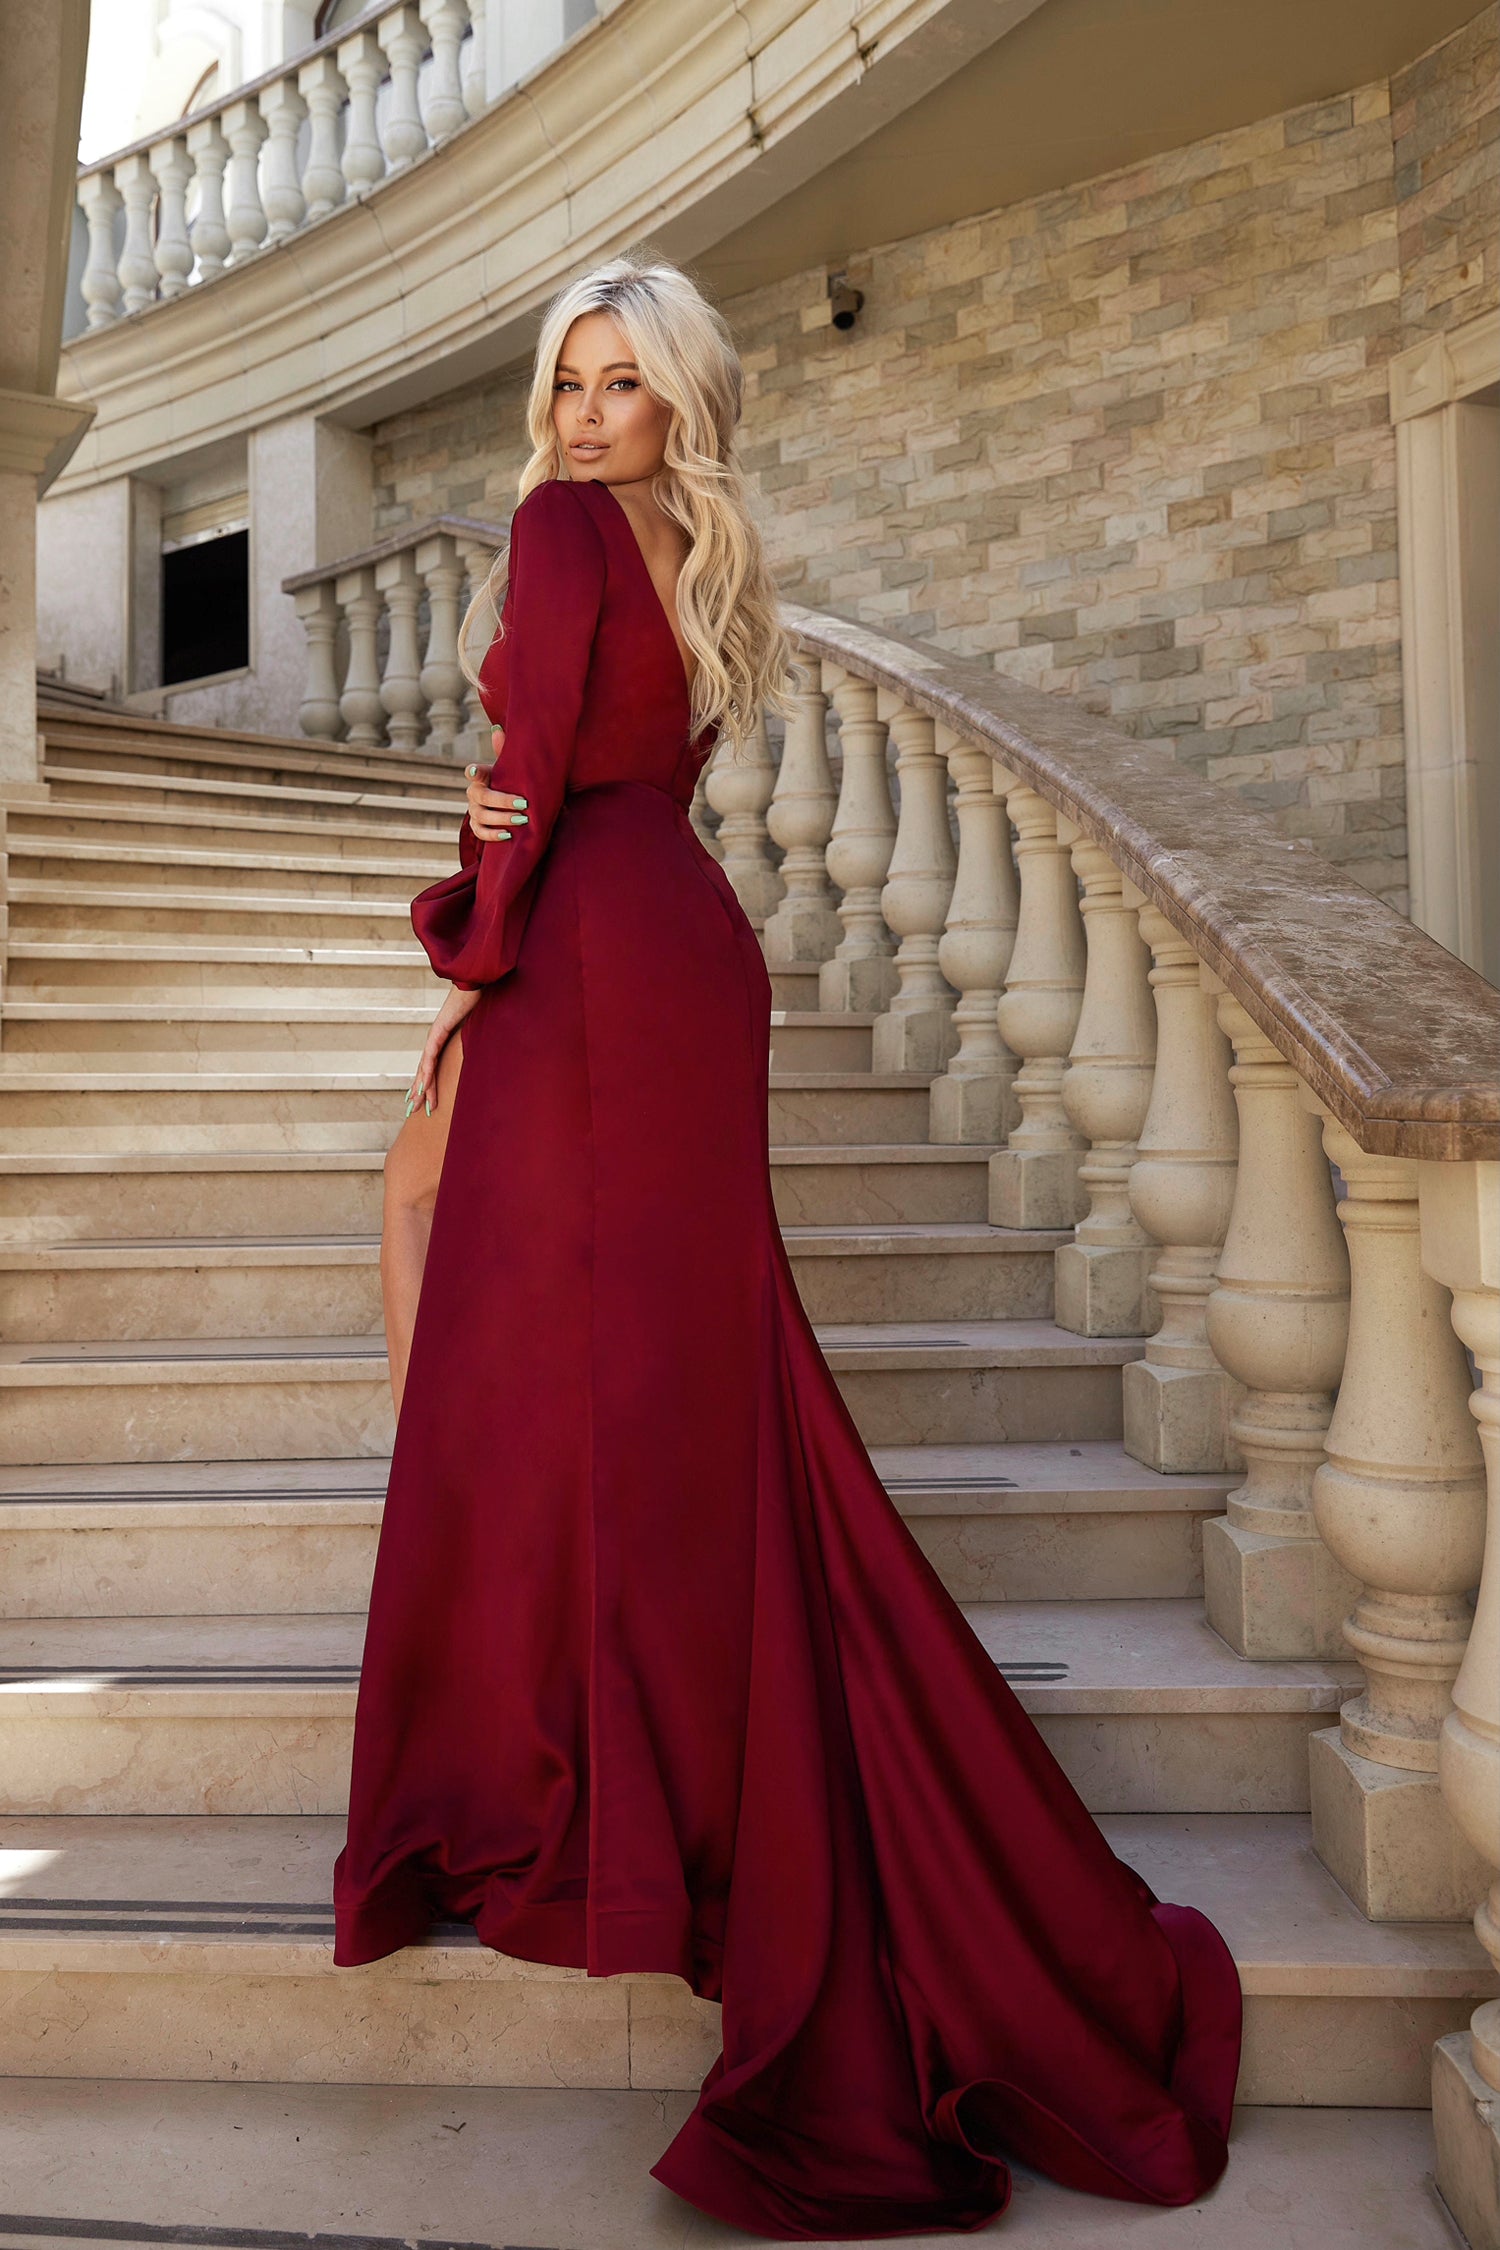 Tina Holly Couture Designer TK305 Burgundy Silky Long Sleeved Formal Gown